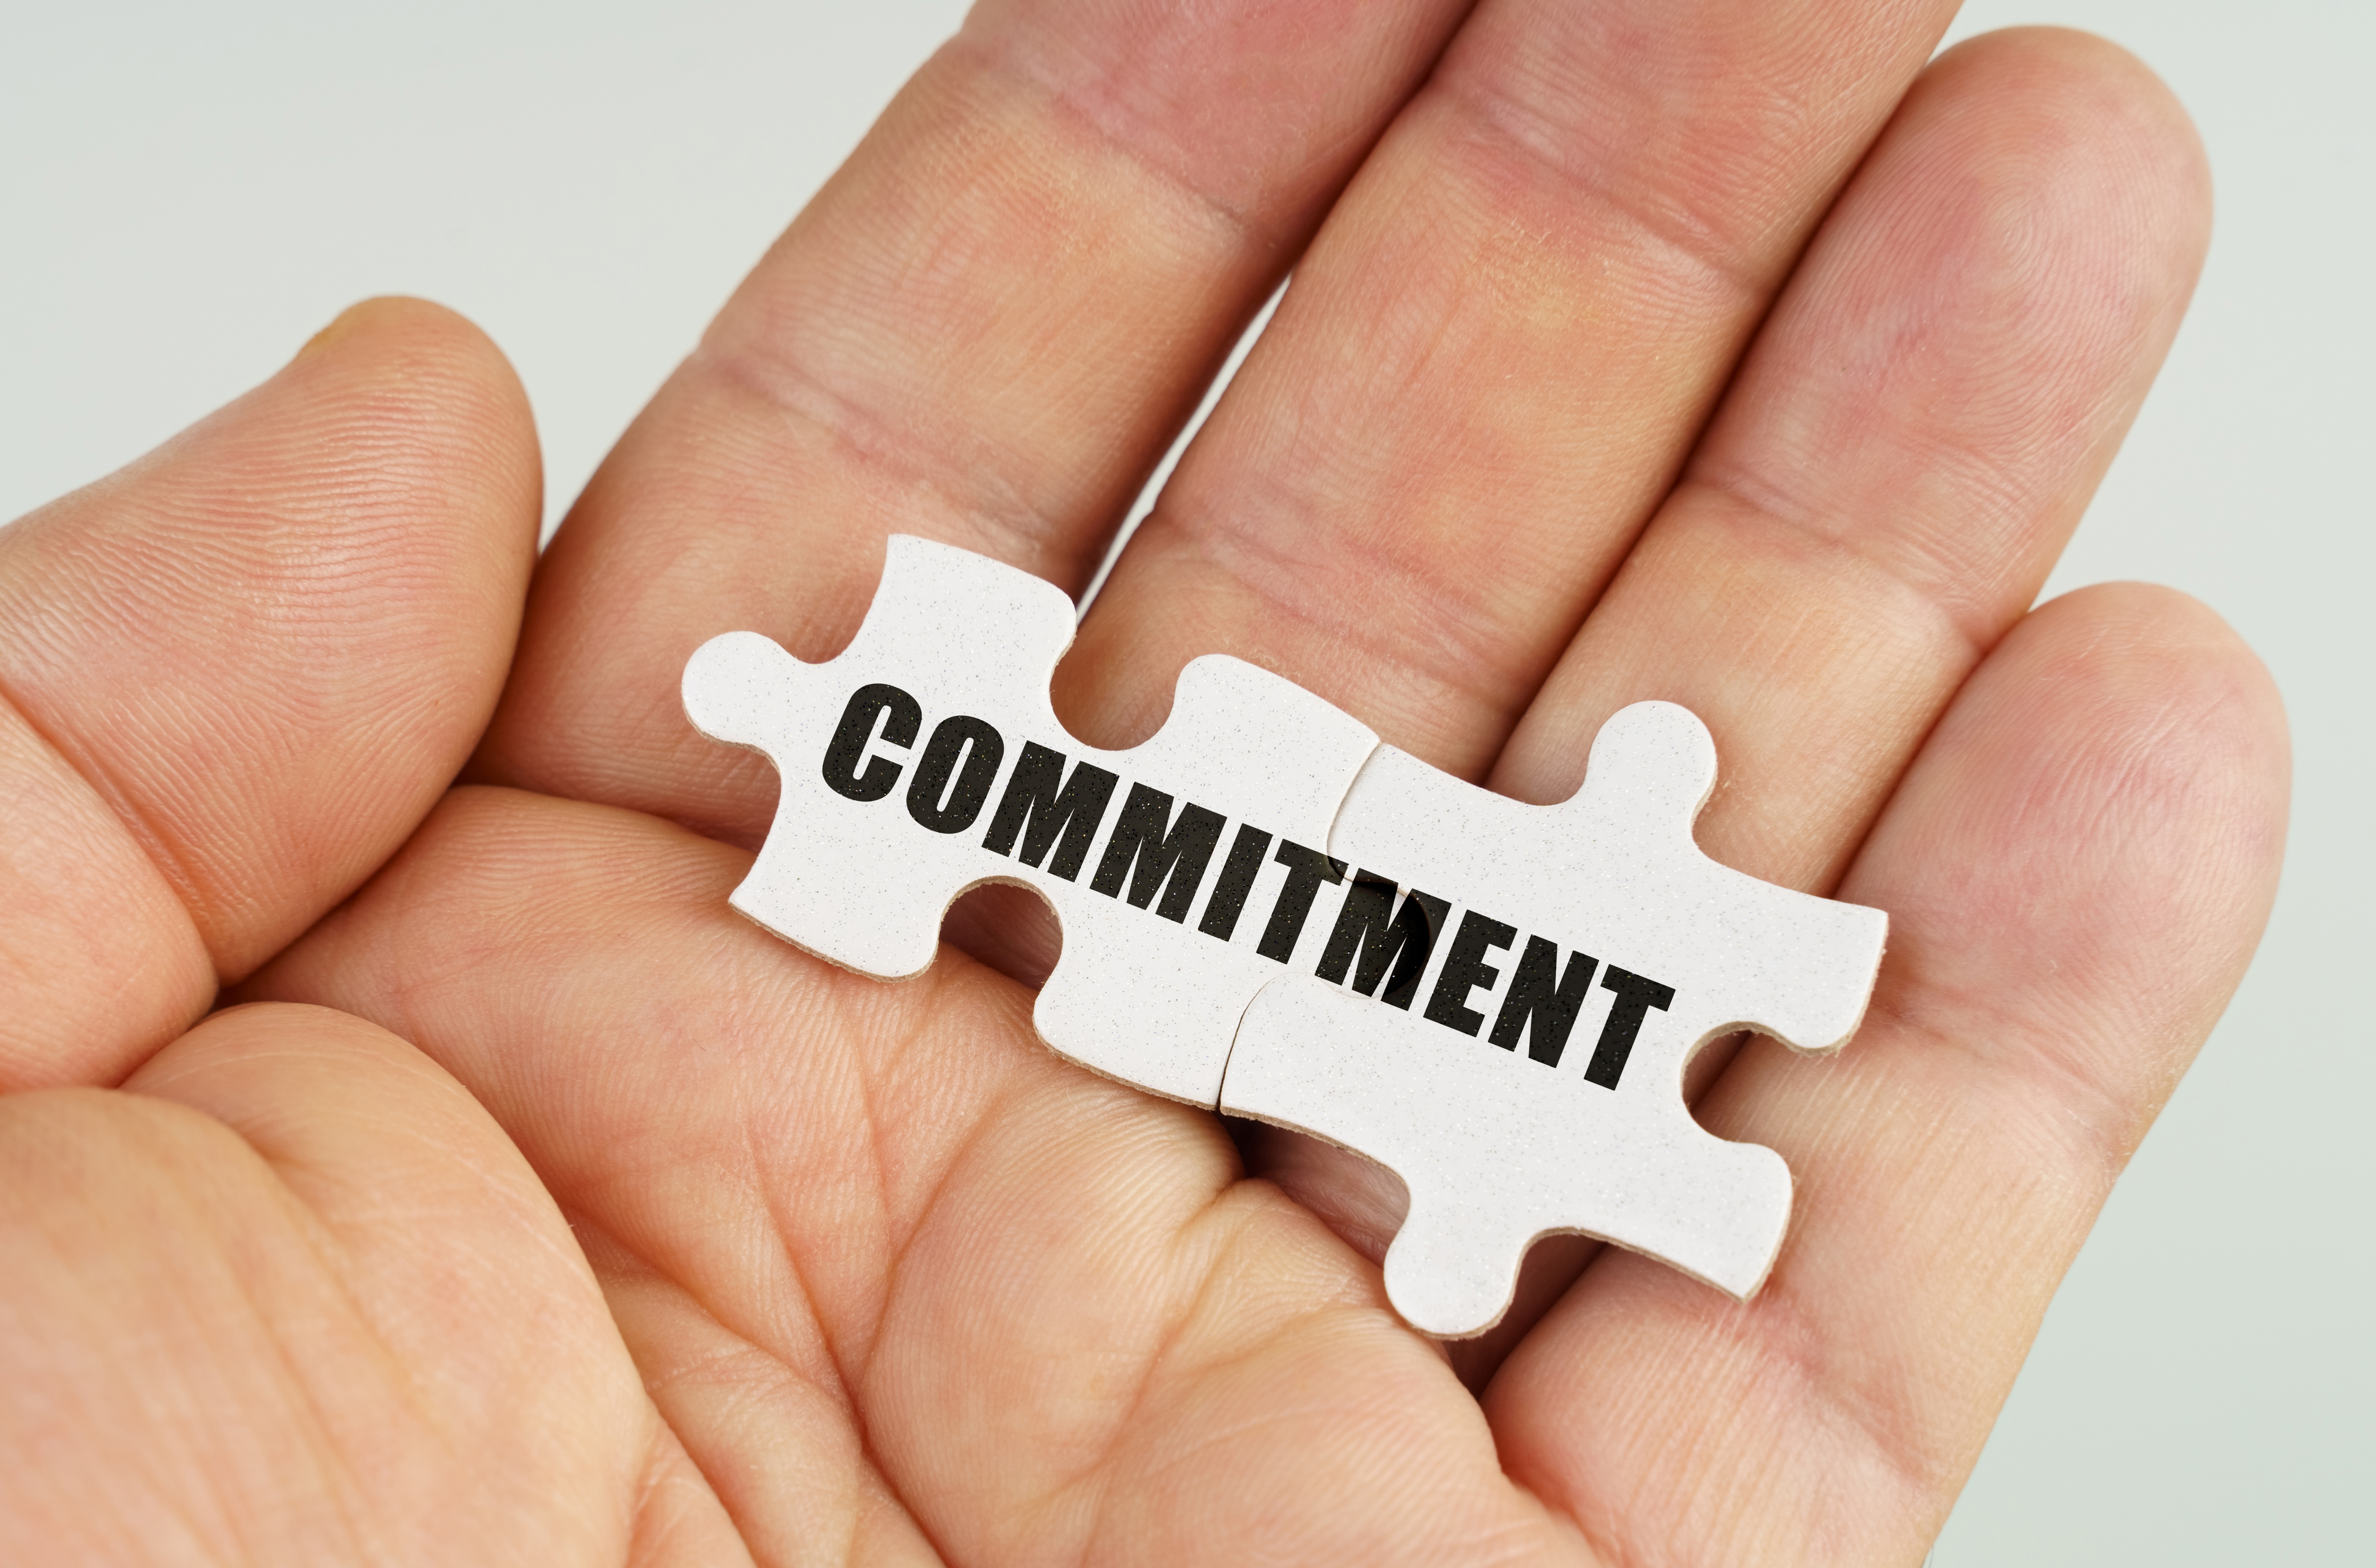 Image with a hand holding two white puzzle pieces that say committment